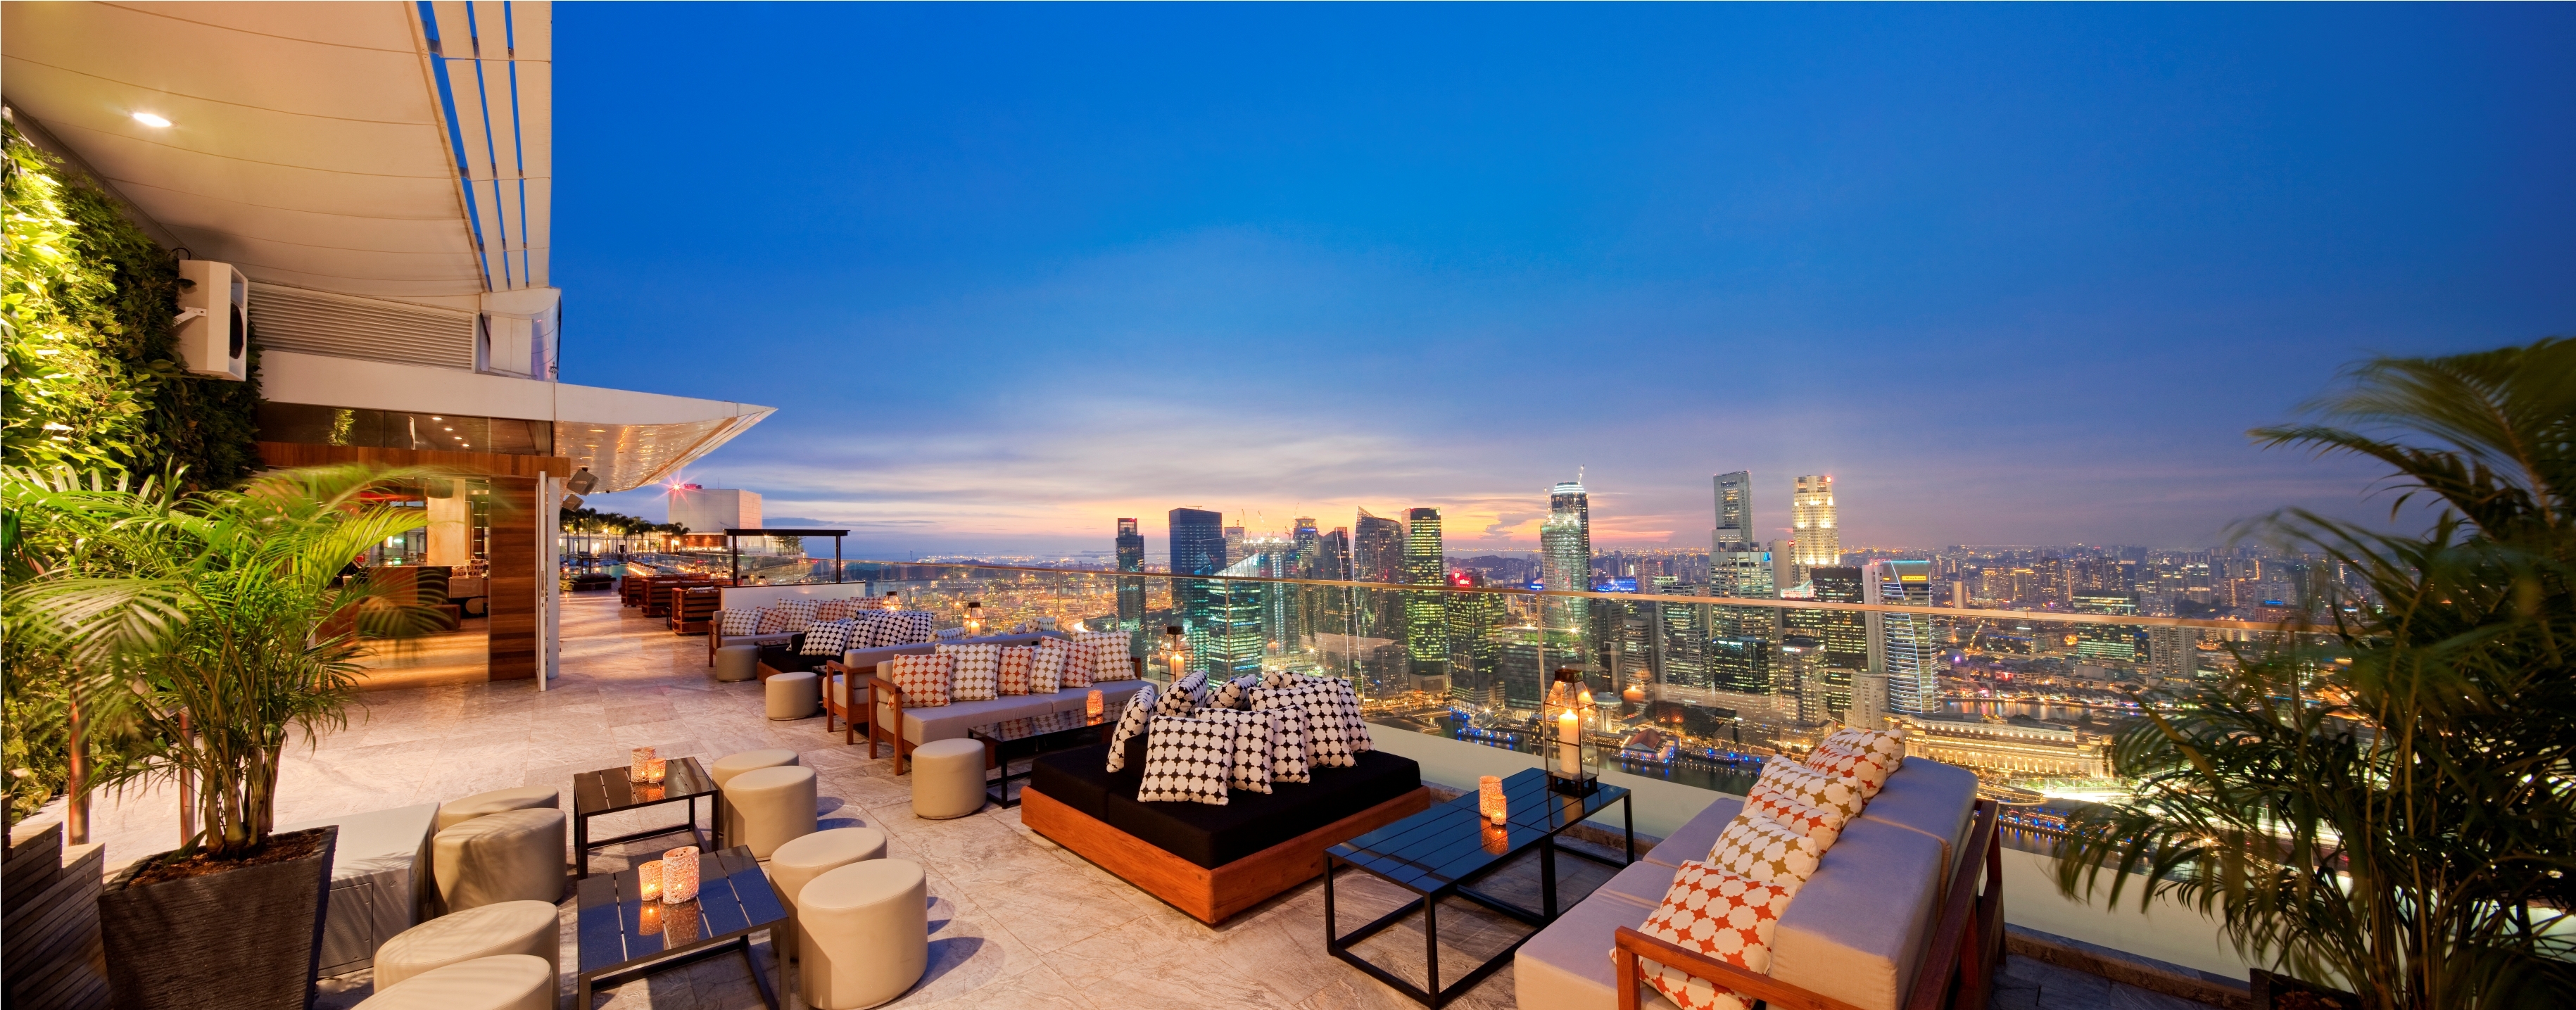 Martinis with a view at Marina Bay Sands | Hotel Management Magazine